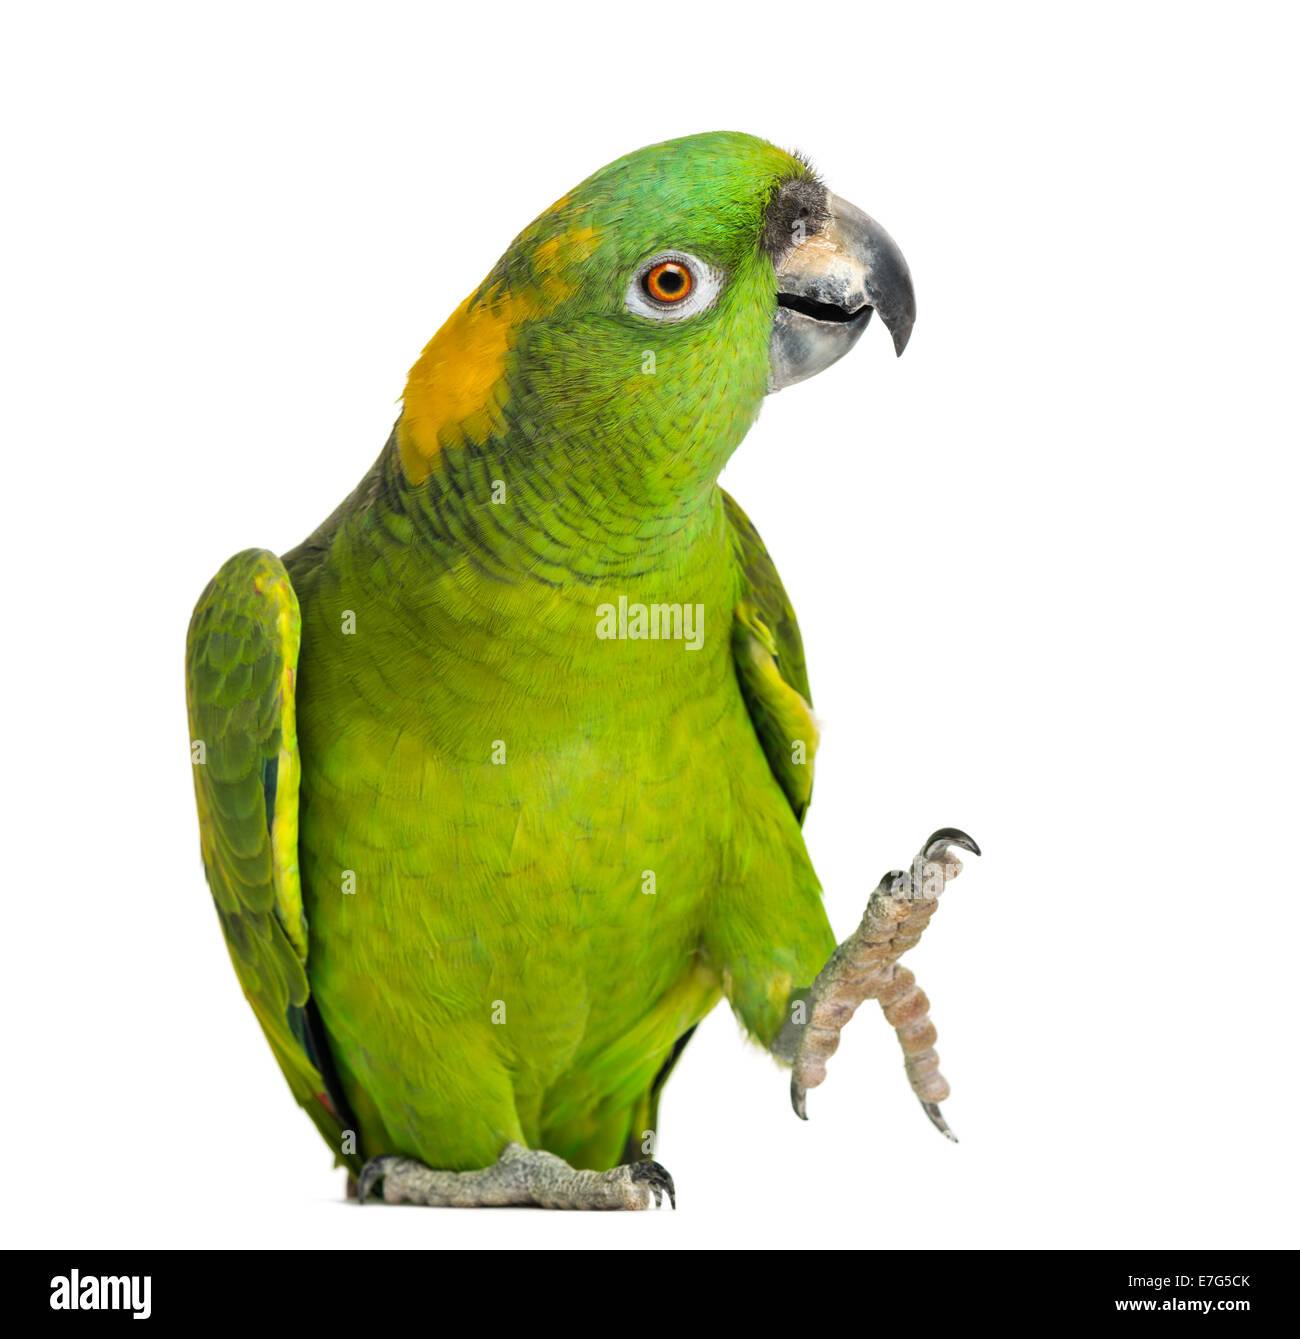 Yellow-naped parrot (6 years old), isolated on white Stock Photo